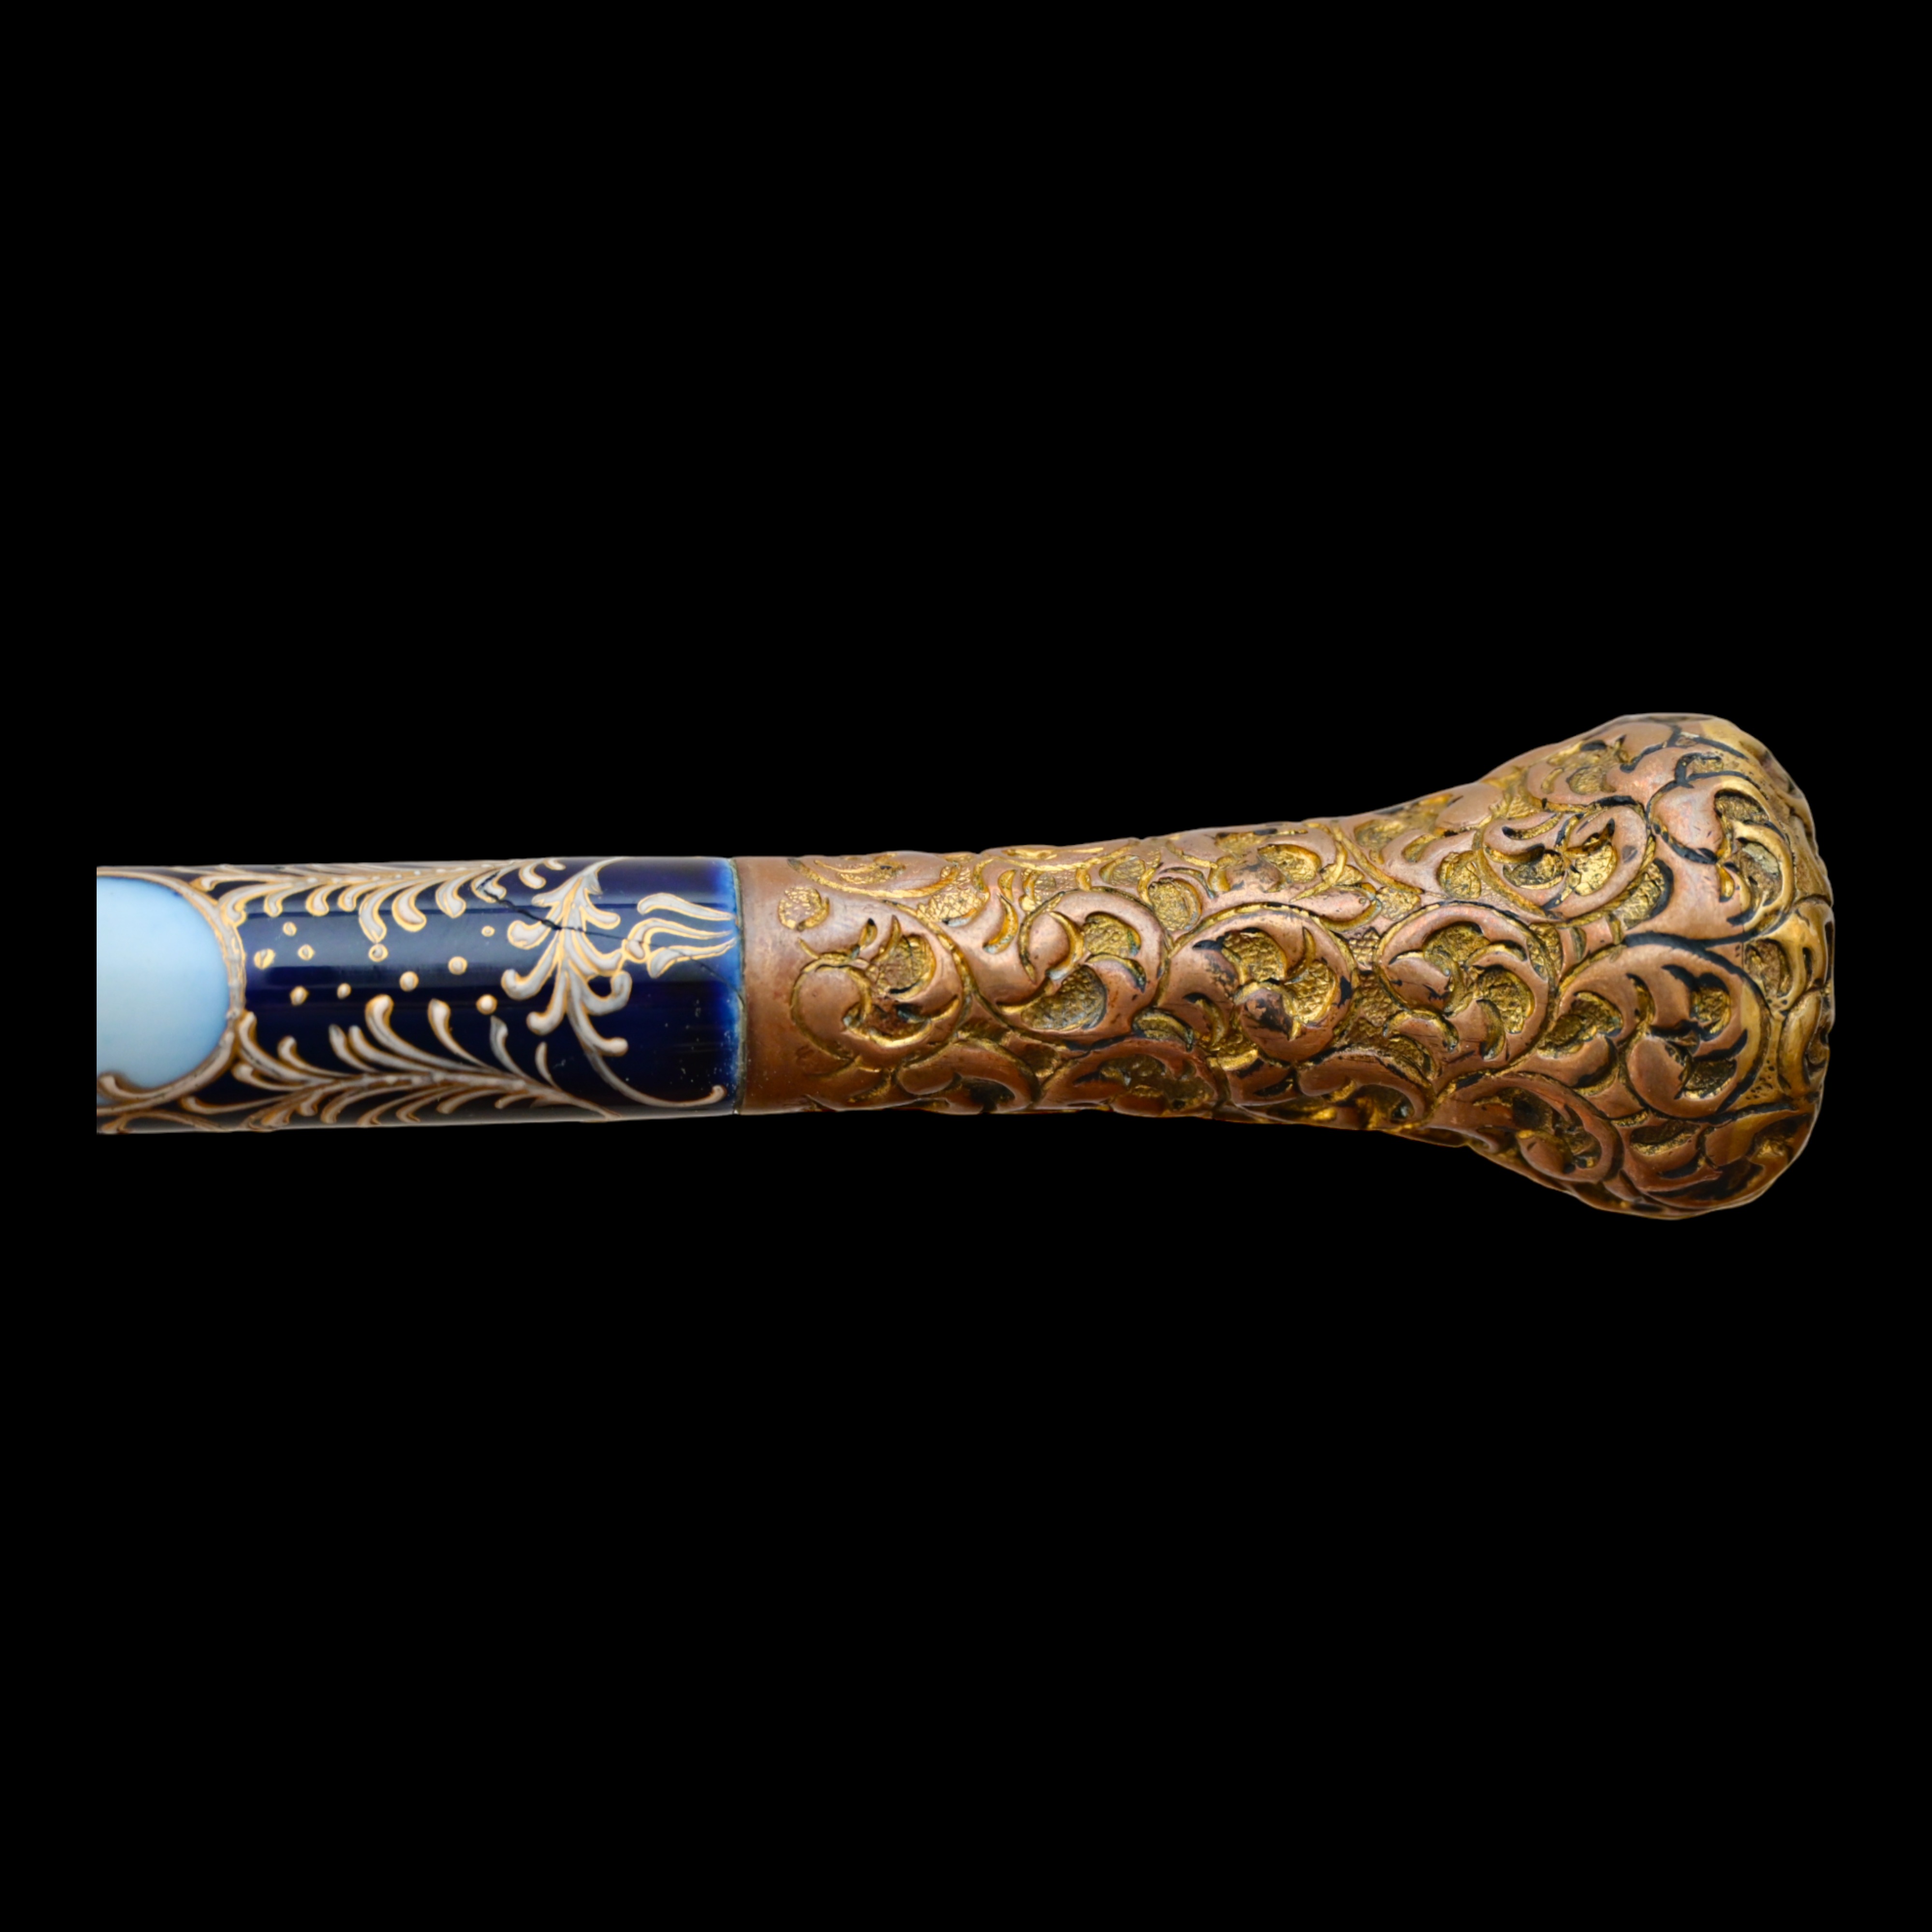 Rare Cane with Porcelain part. Limoge Porcelain Manufactory. France, 19th century. - Image 6 of 12